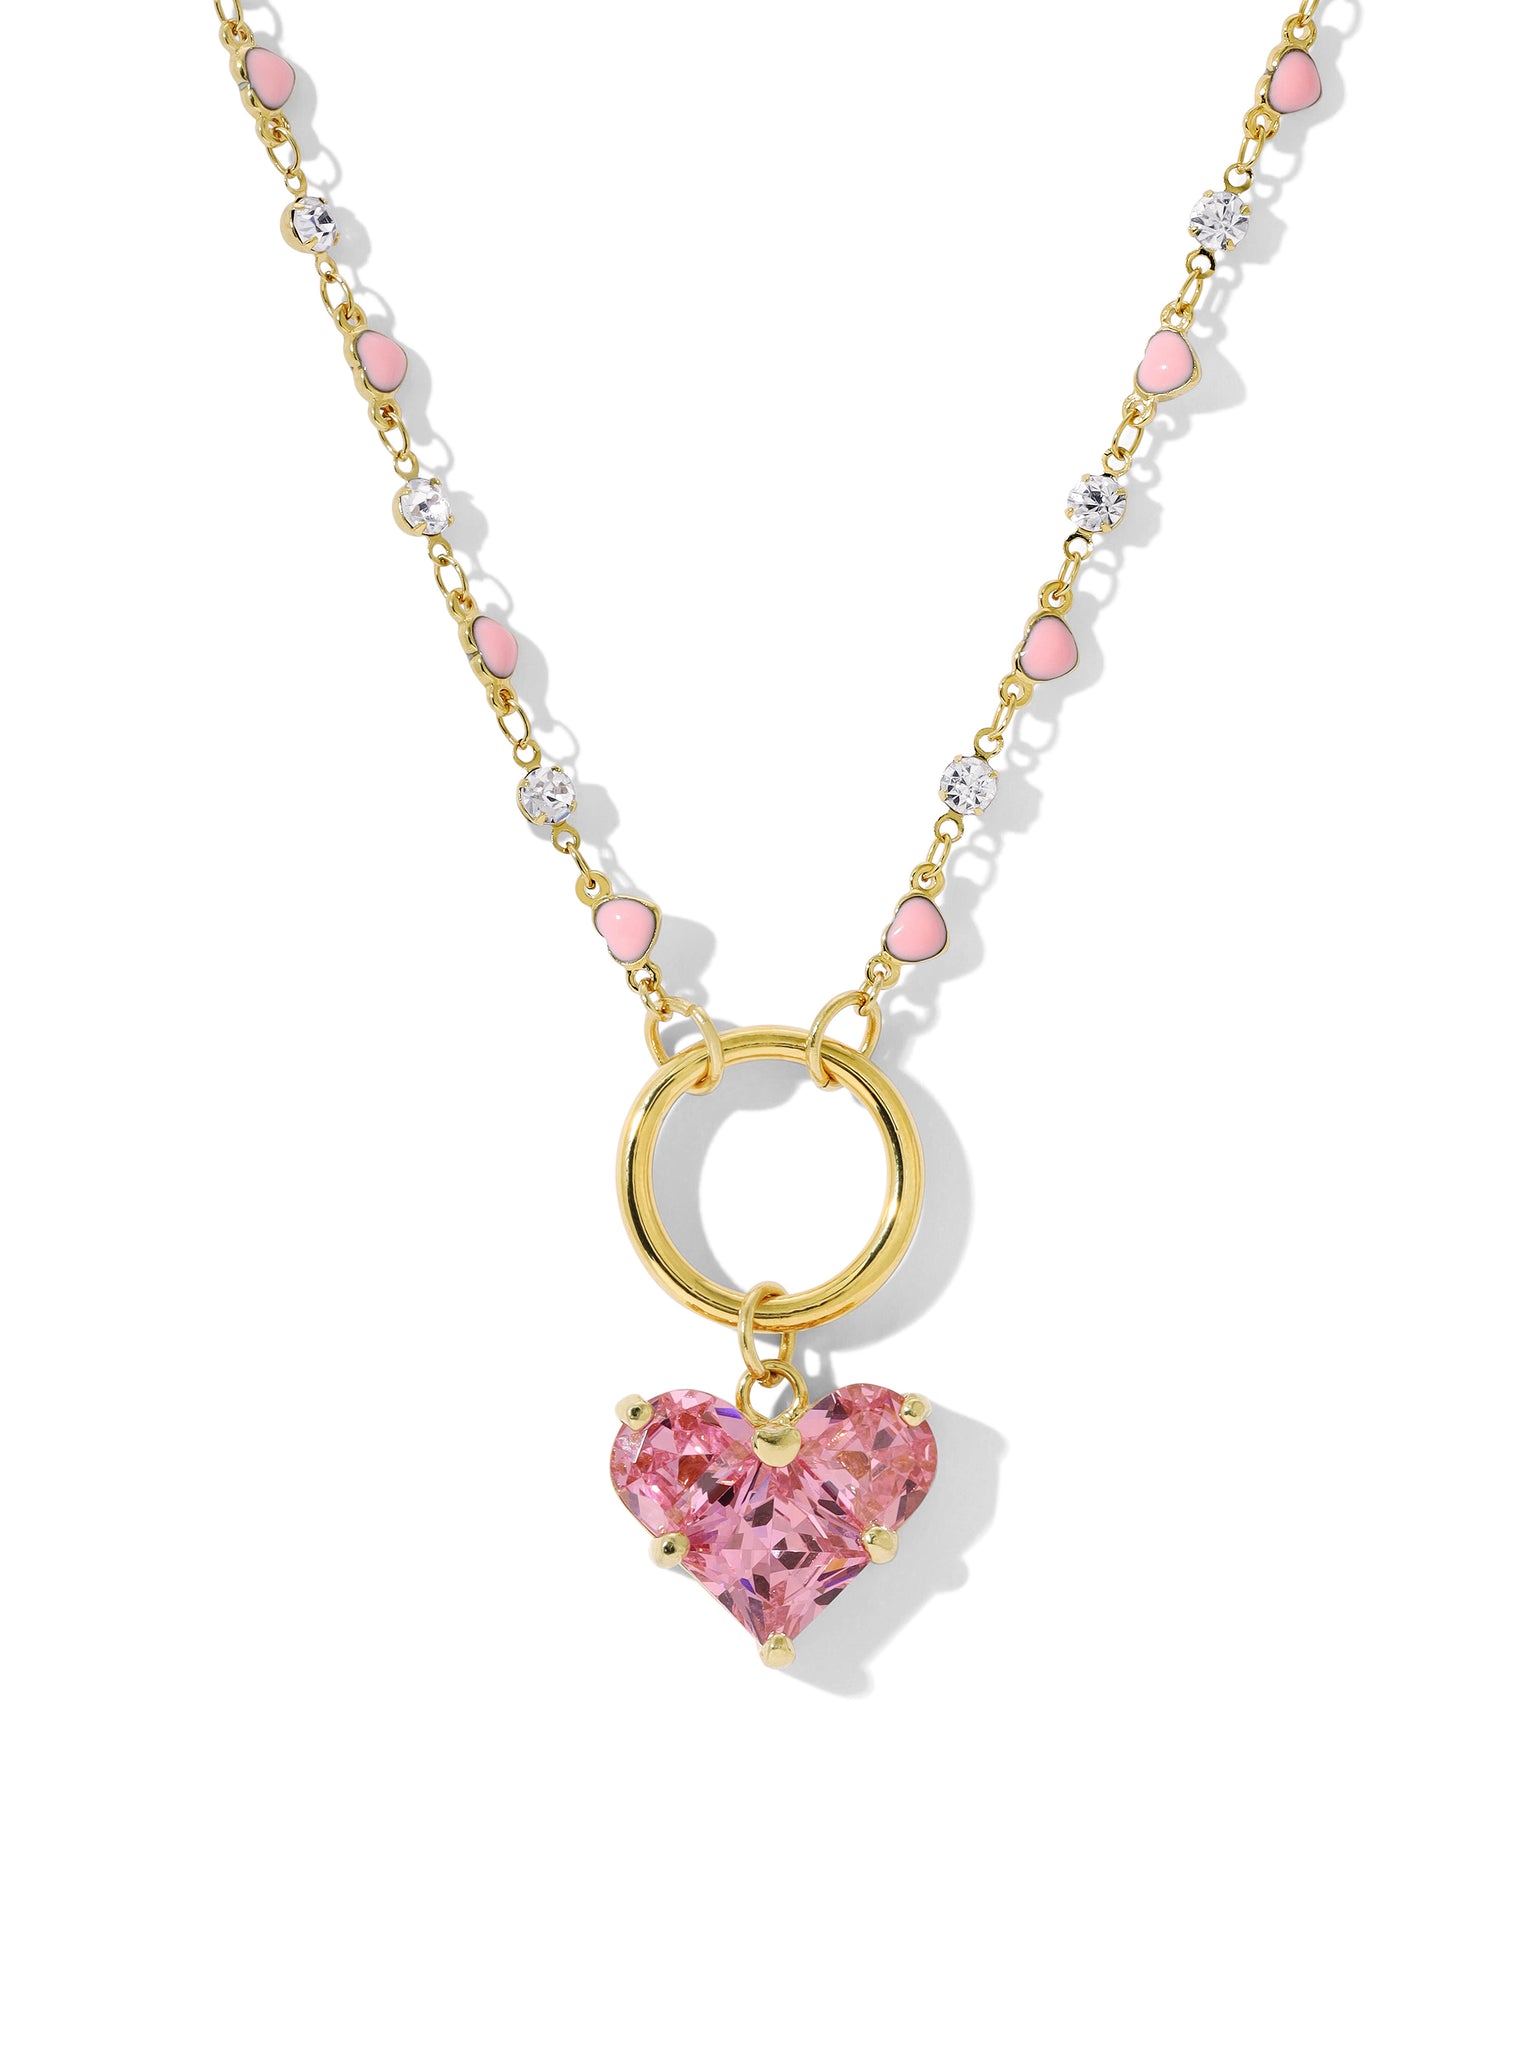 The Betsy Heart Necklace